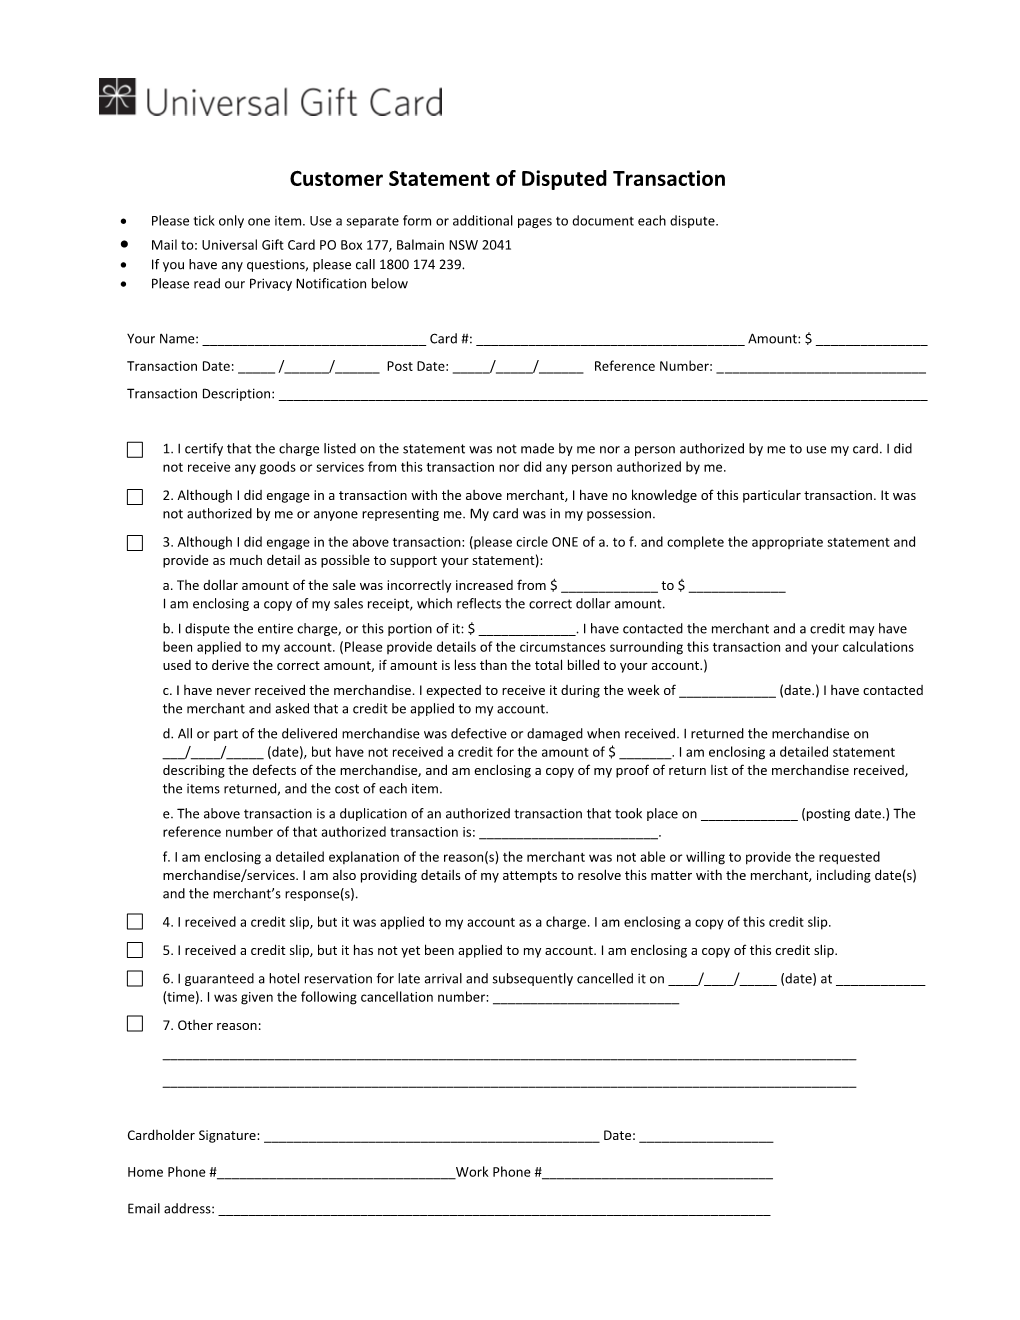 Customer Statement of Disputed Transaction